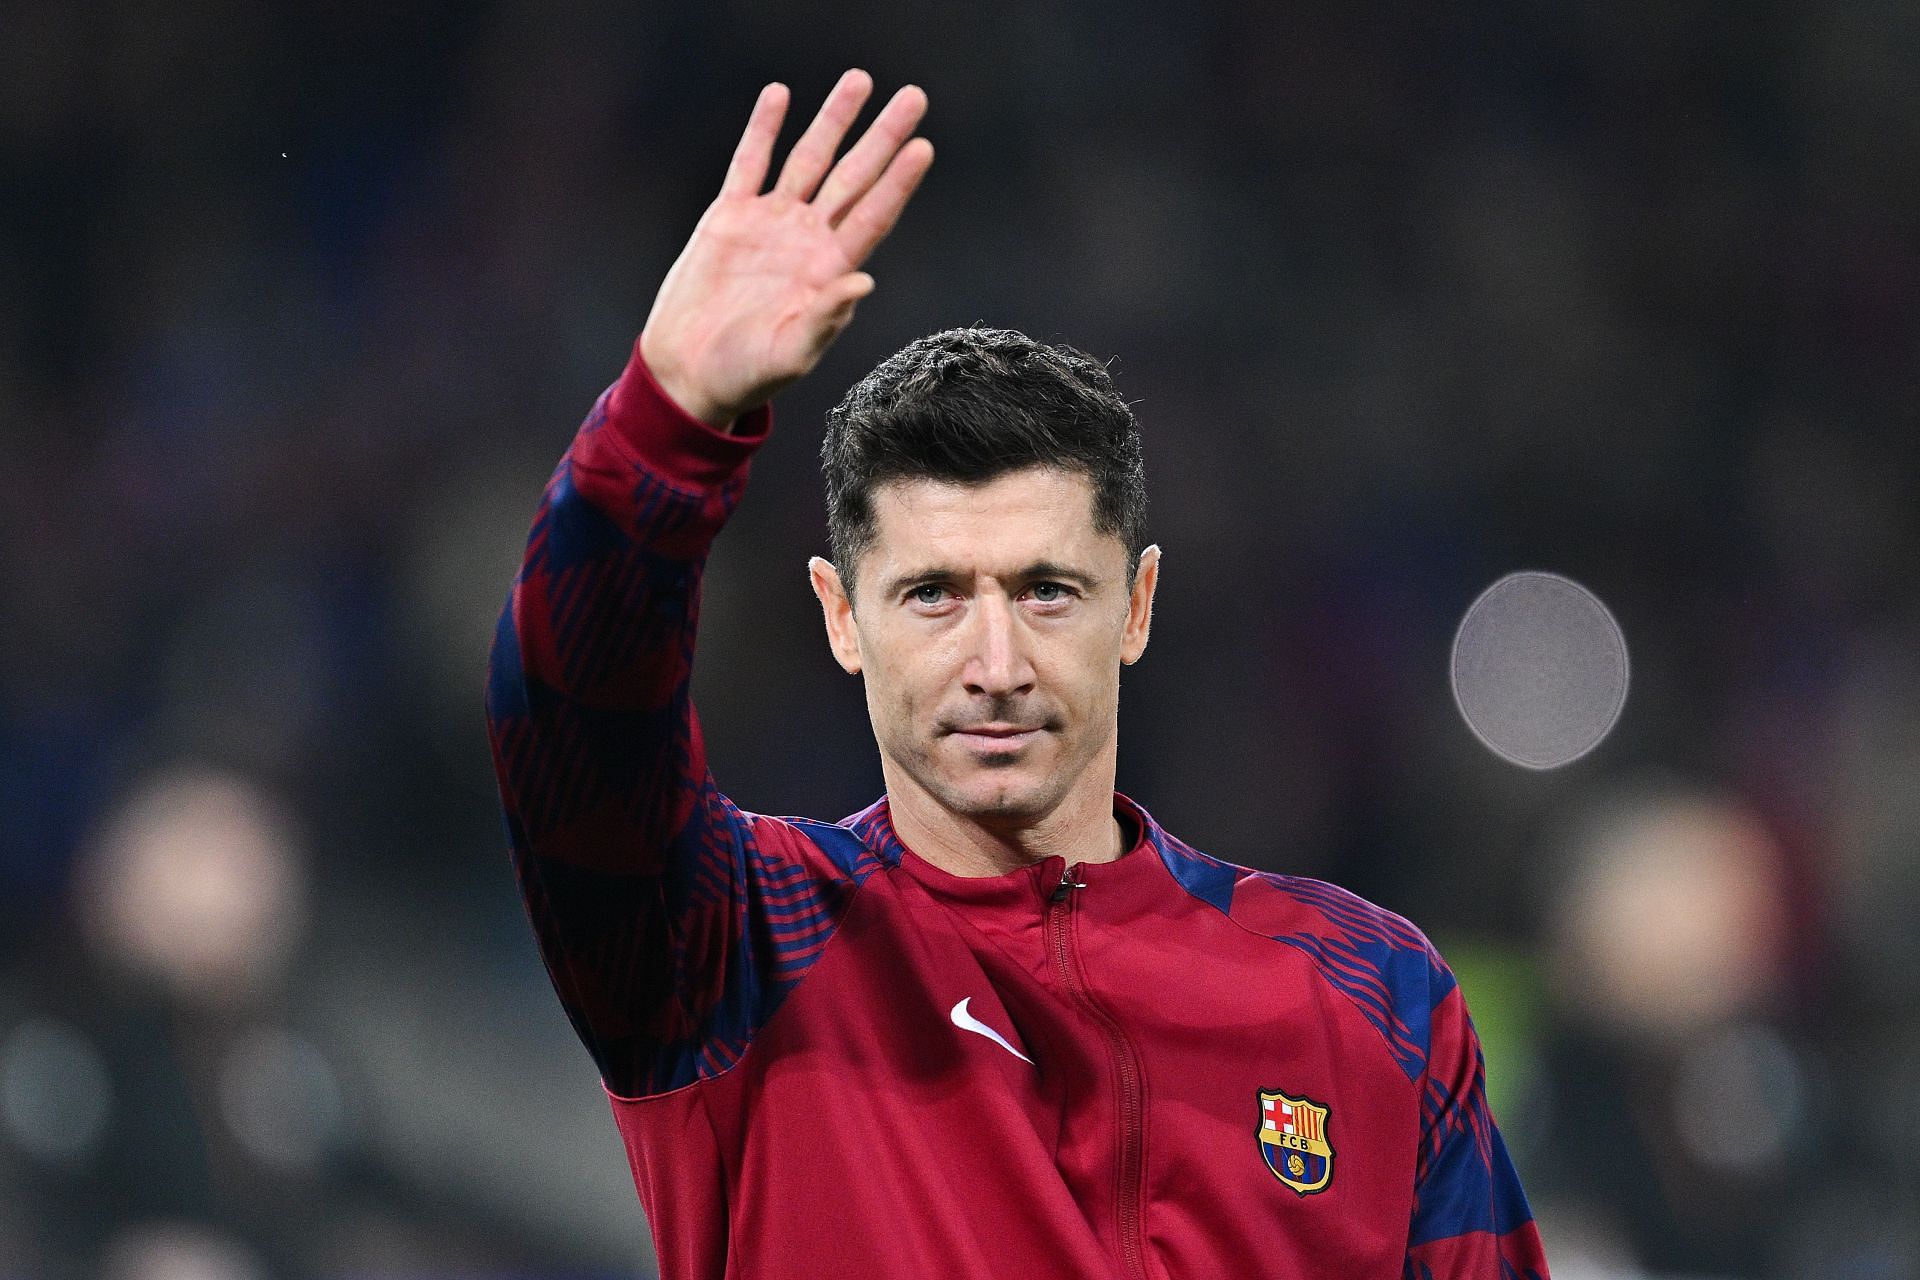 Robert Lewandowski wanted to link up with Lionel Messi.